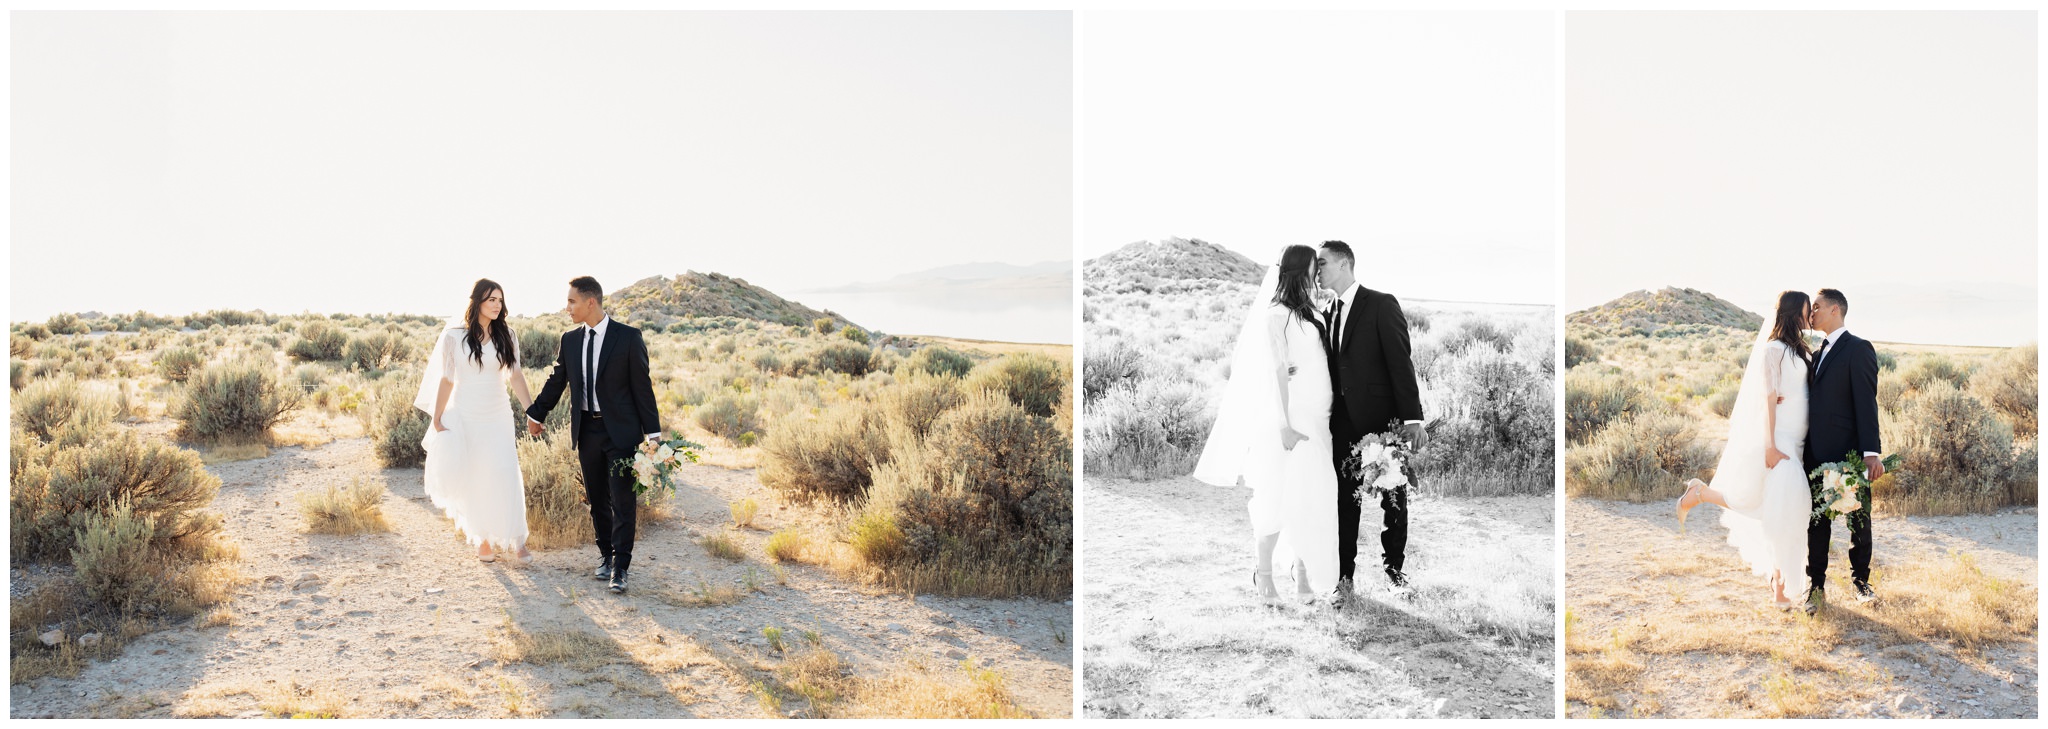 Heel pop kiss. Bride and groom kissing on their wedding day. Bride and groom portraits. Creative poses at Antelope Island